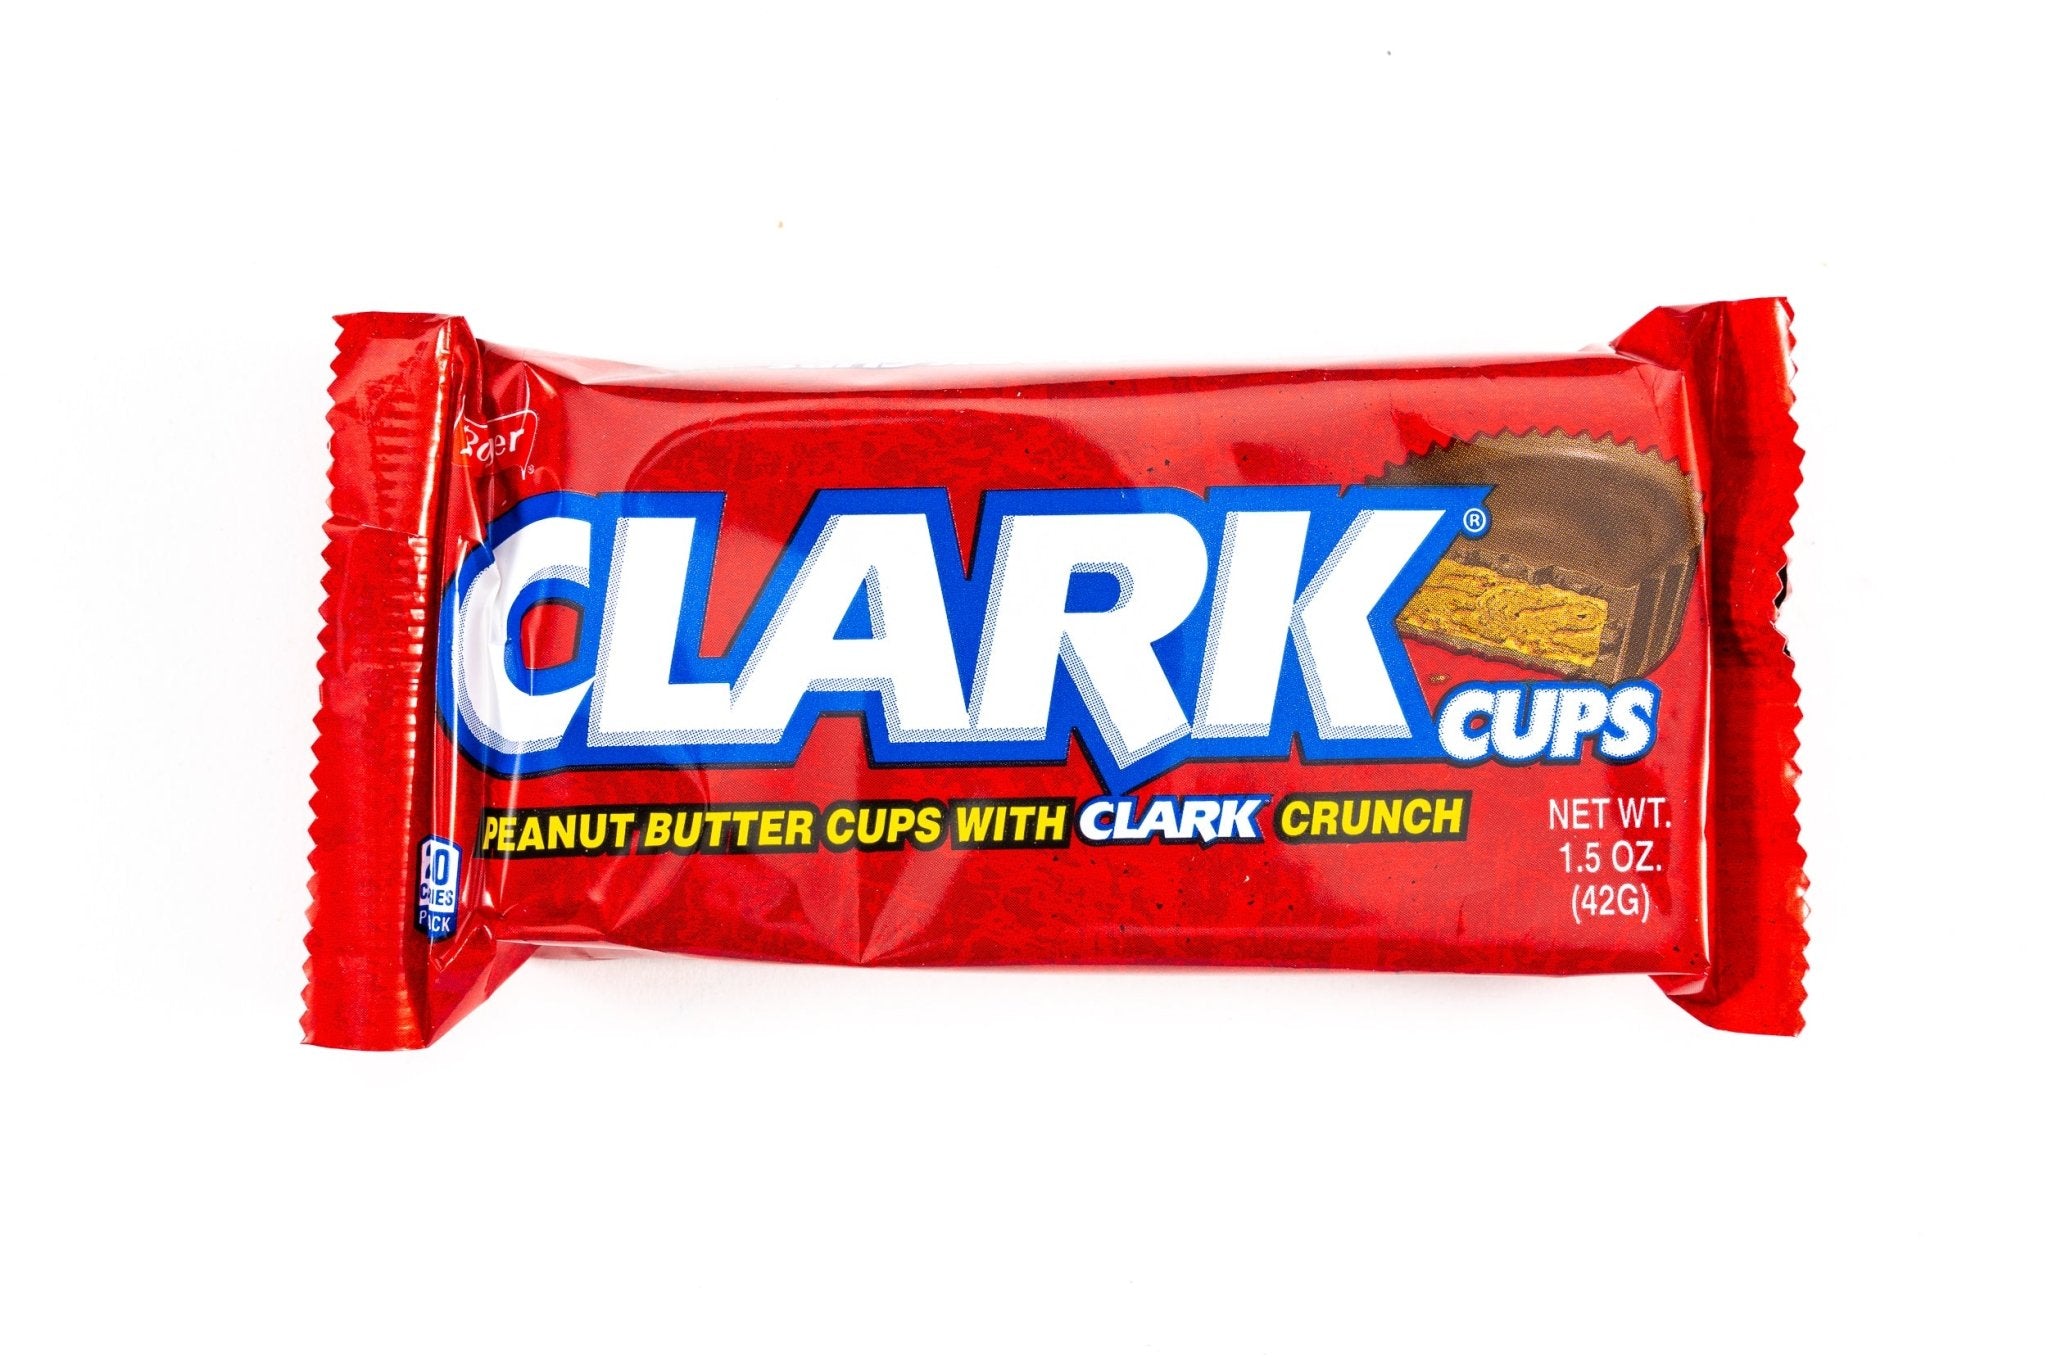 Copy of Clark Cups Peanut Butter Cups (1.5 oz) - Vintage Candy Co.